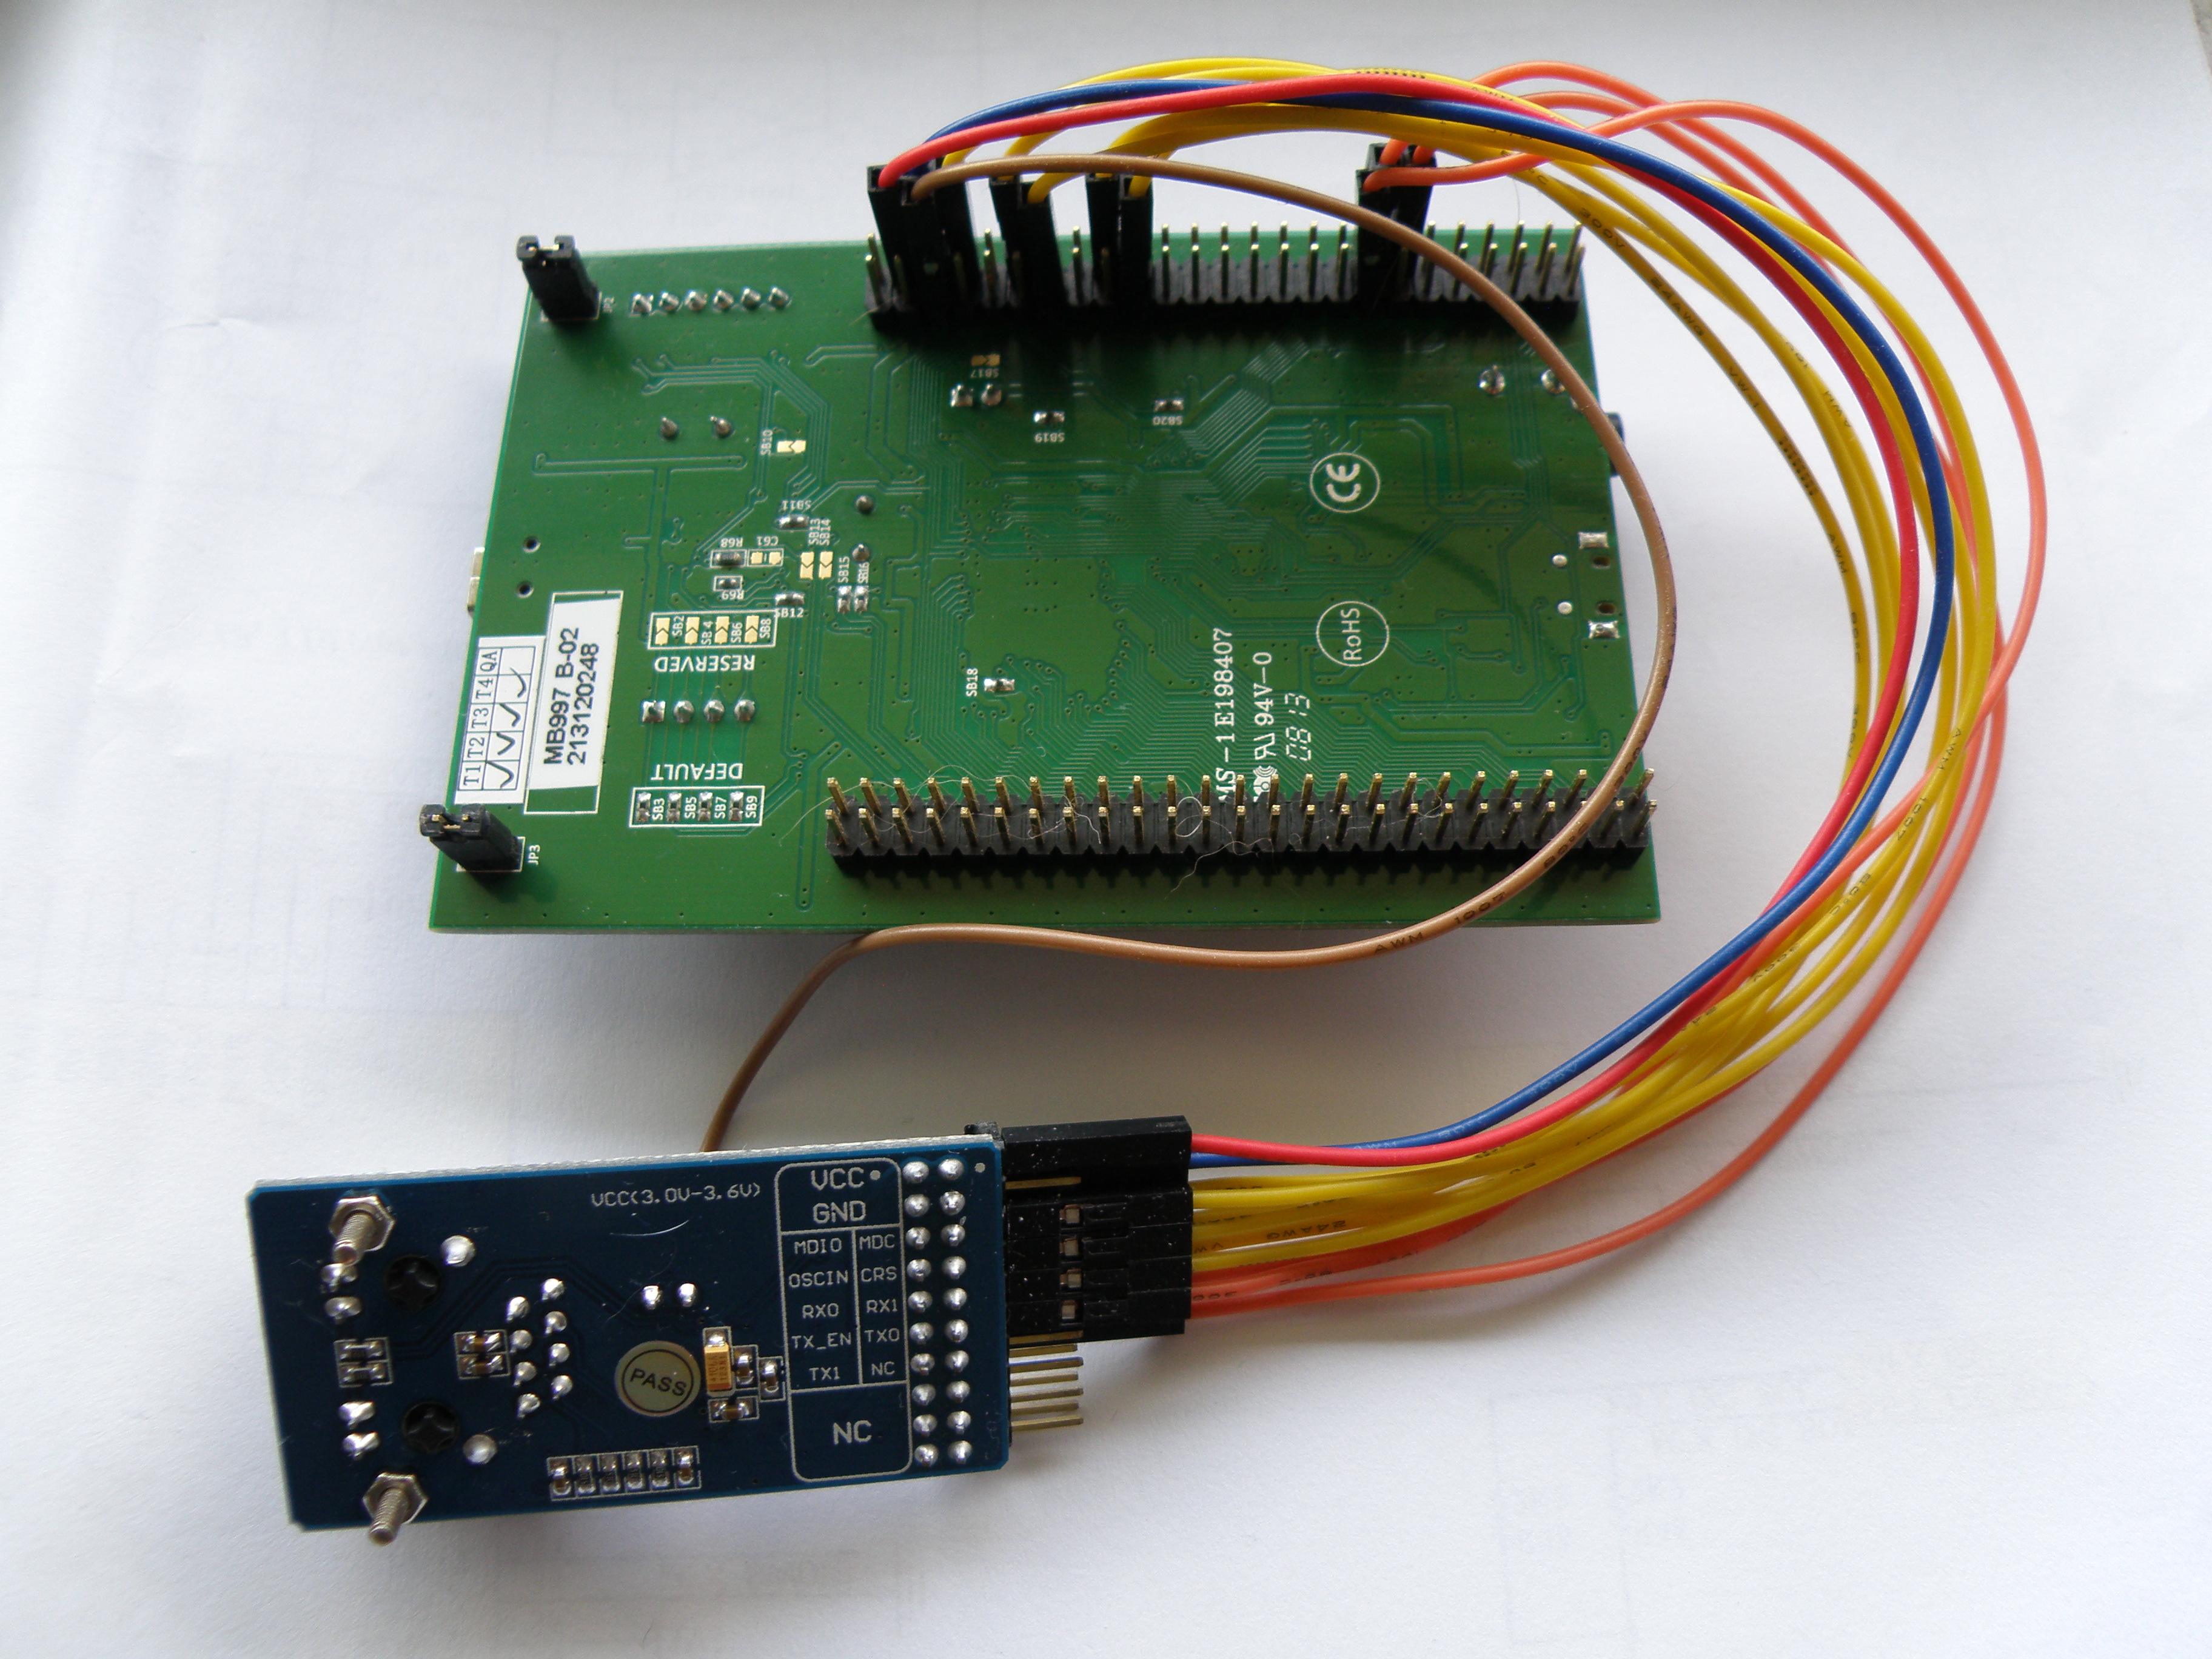 Stm32 connection